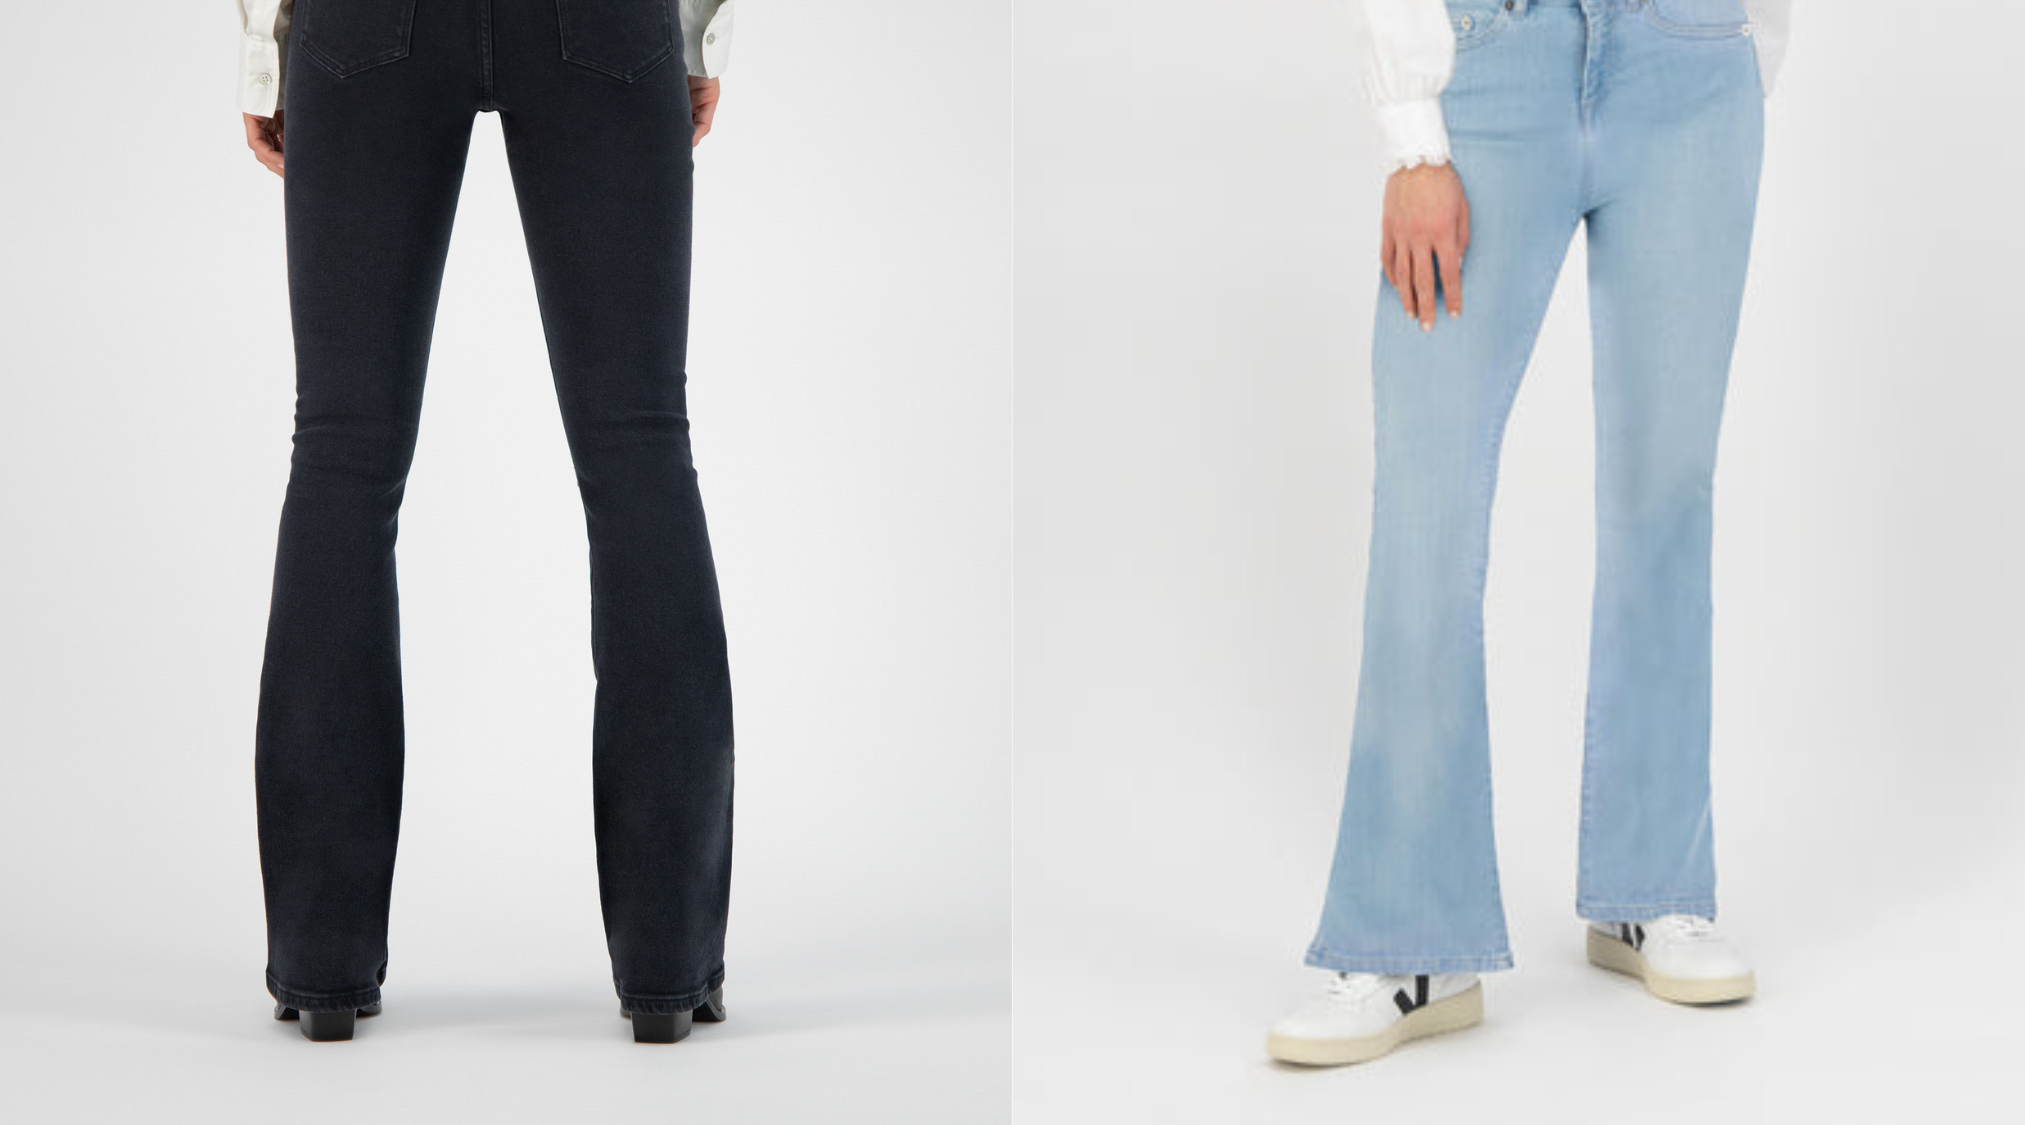 Shop sustainable flared jeans at Sophie Stone